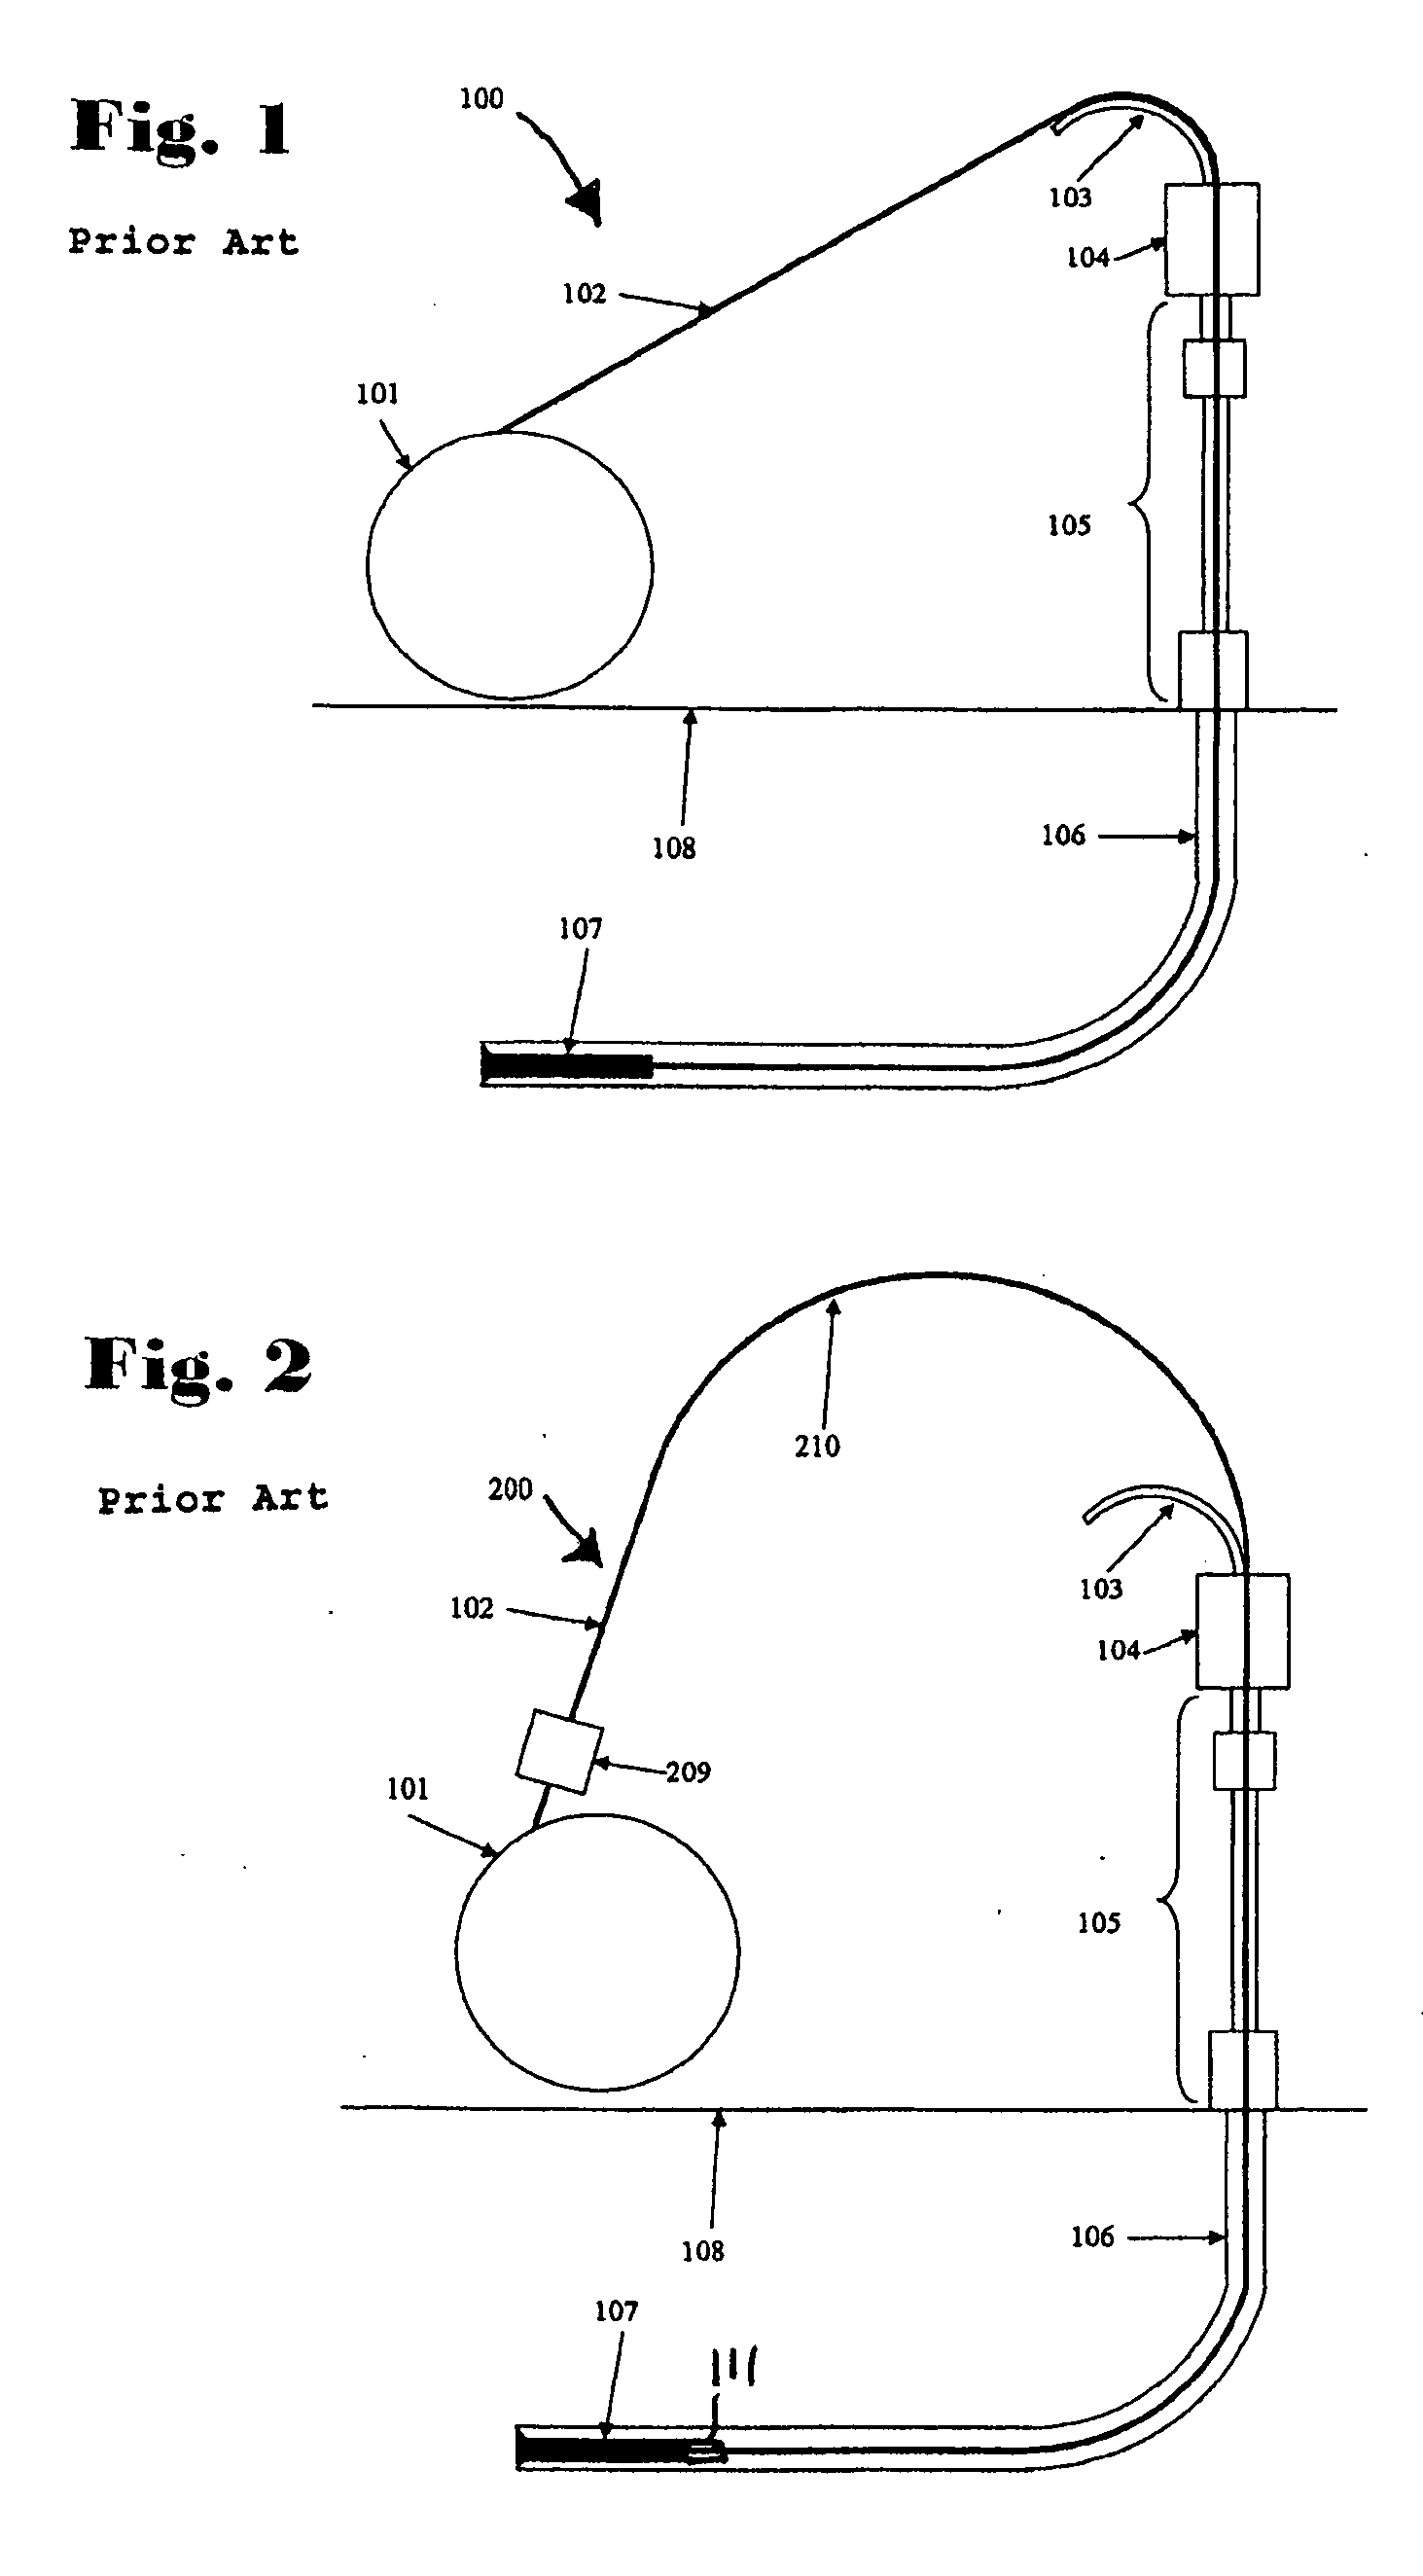 Coiled tubing vibration systems and methods